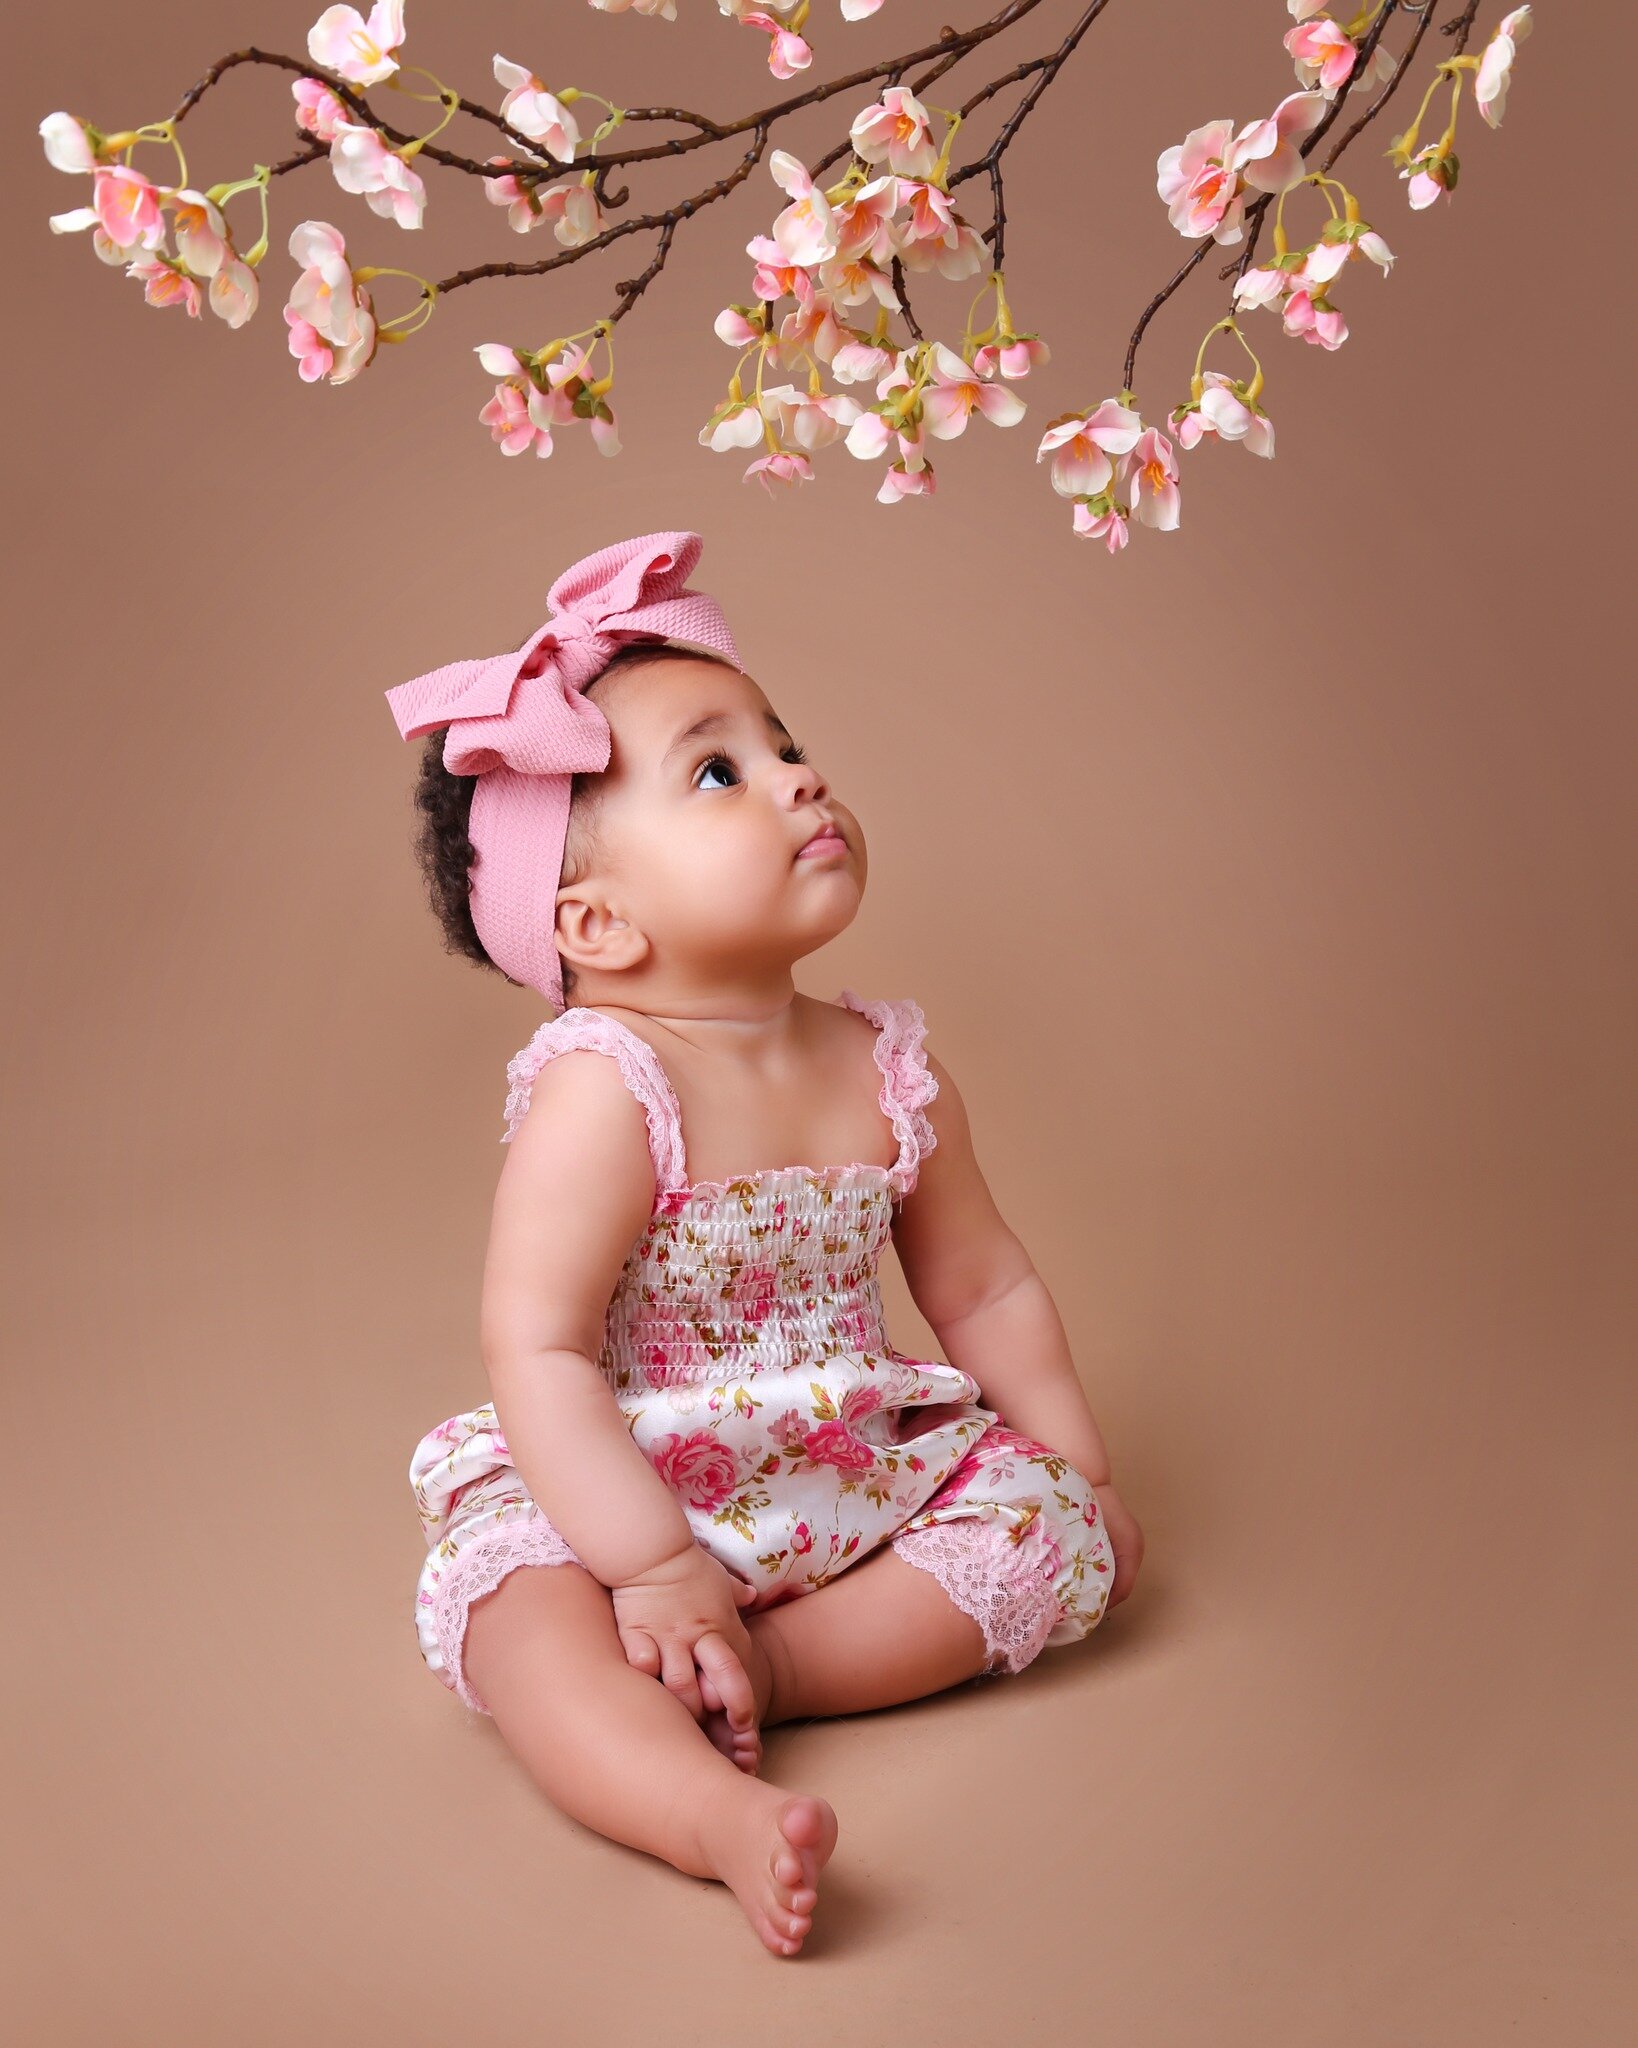 Spring has Sprung! 🌸

Photographed by Emily

Book in online at www.winkphoto.co.uk

#indigbeth #birmingham #familystudio #birminghamphotographer #springphotoshoot #flowerphotoshoot #Zellig